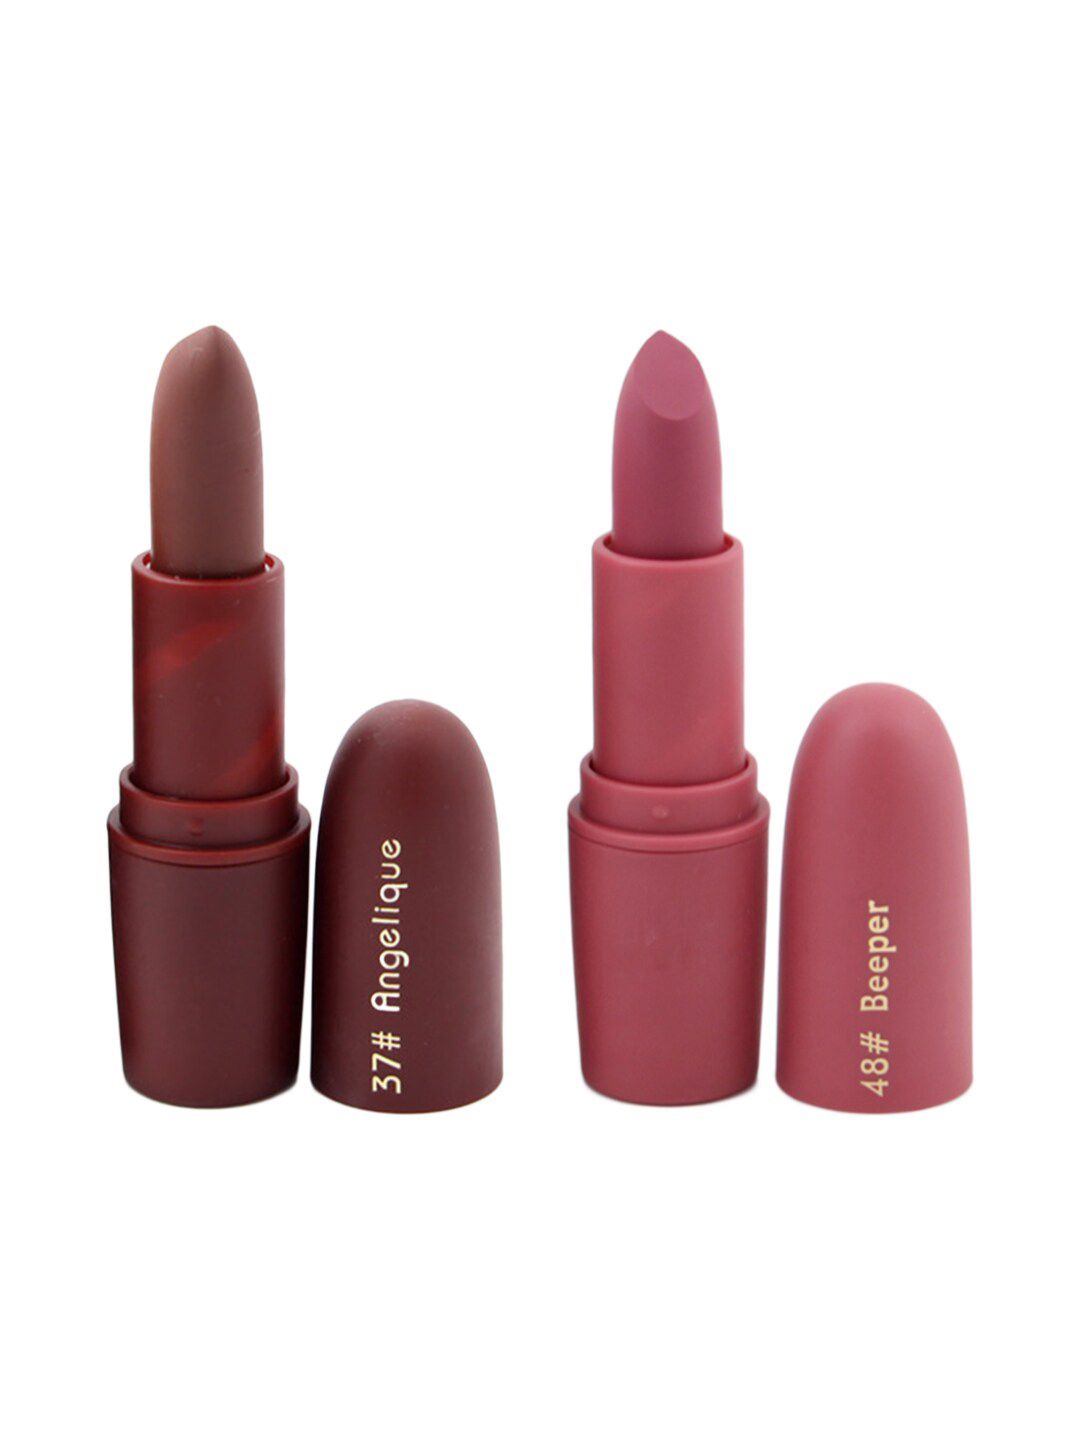 MISS ROSE Professional Make-Up Set of 2 Matte Creamy Lipsticks - Angelique 37 & Beeper 48 Price in India